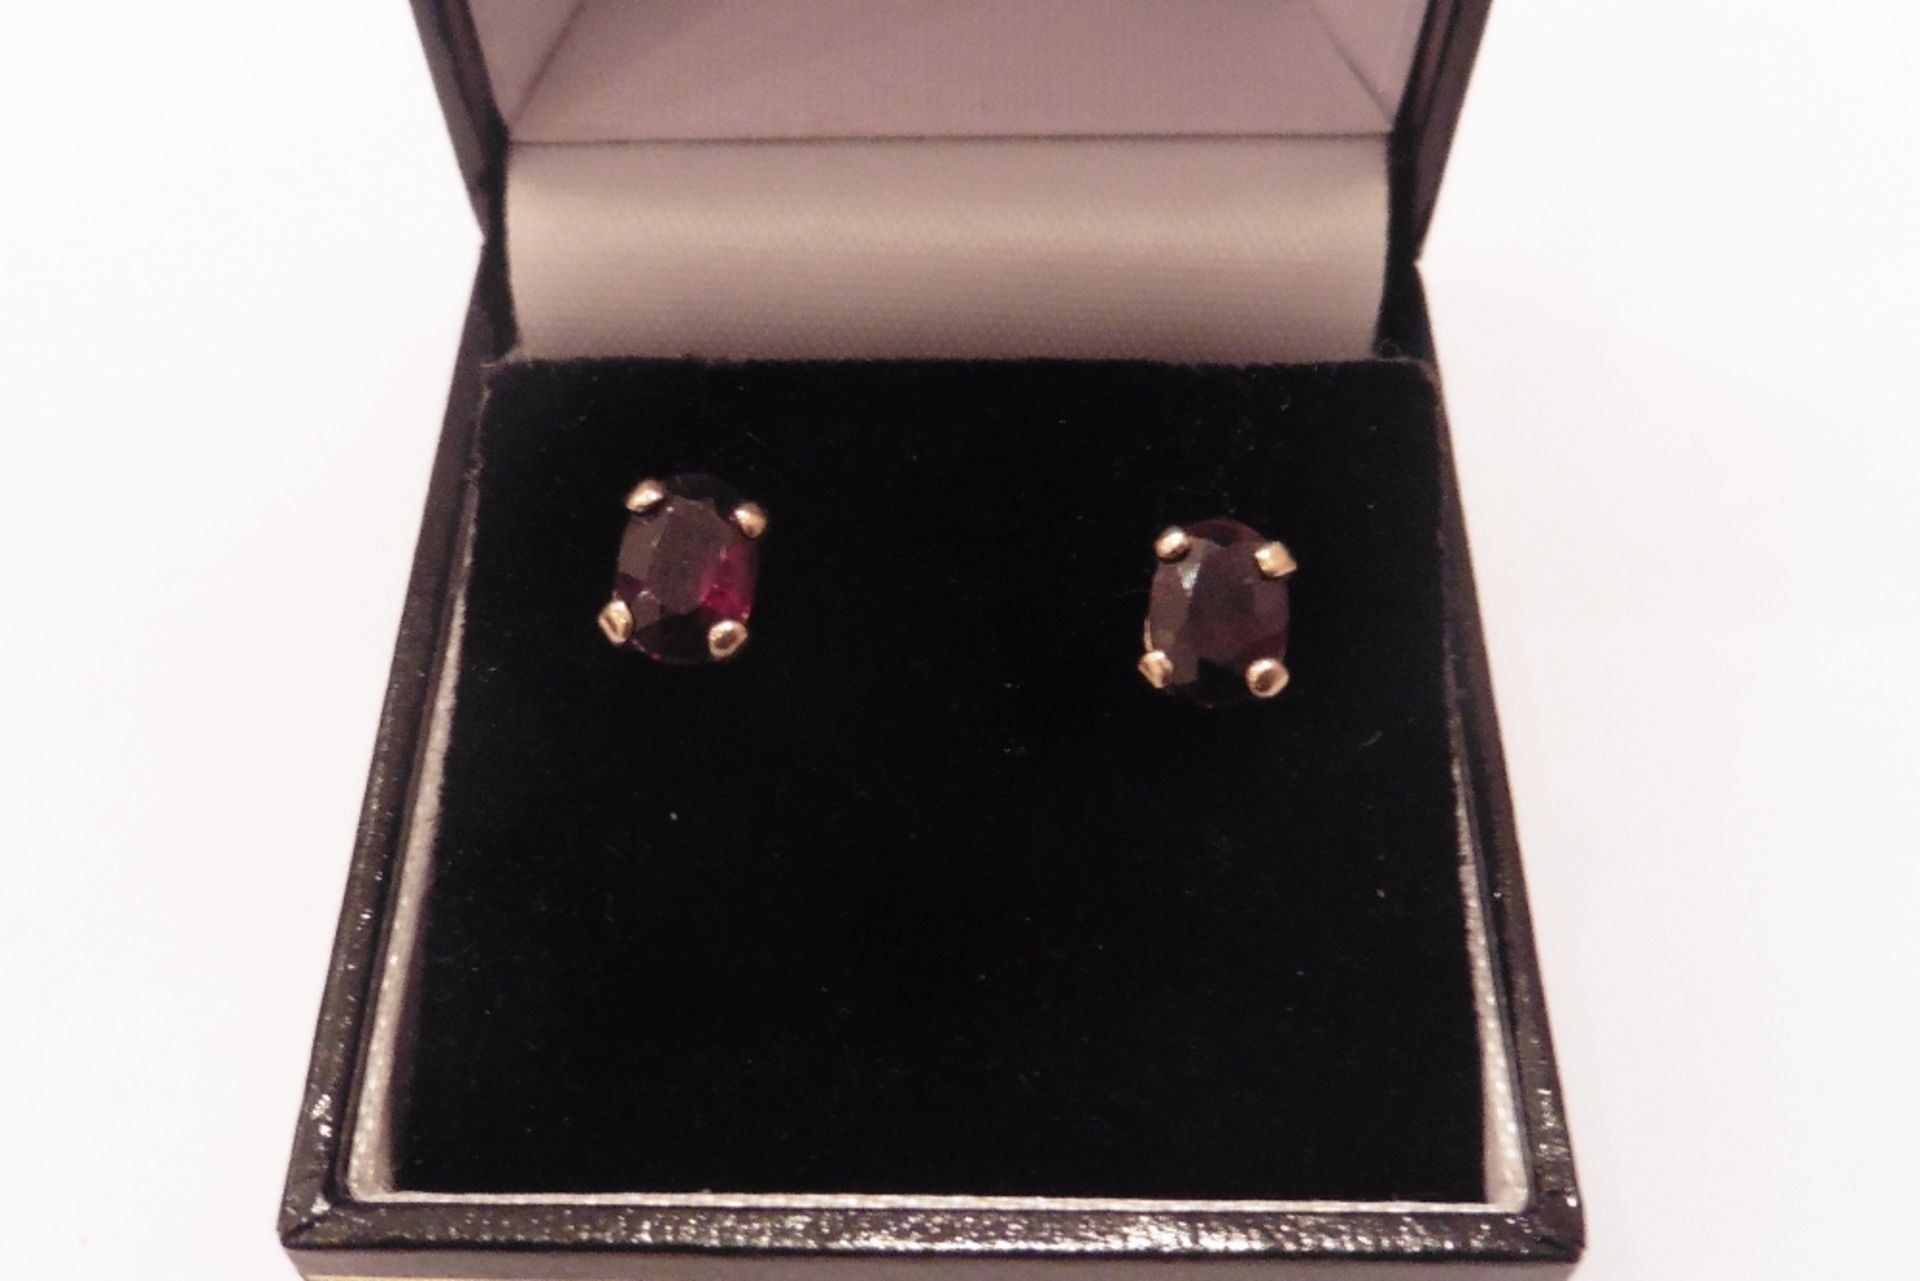 Pre-owned 9ct yellow gold red garnet stud earrings with oval cut stones, simple claw setting. Standa